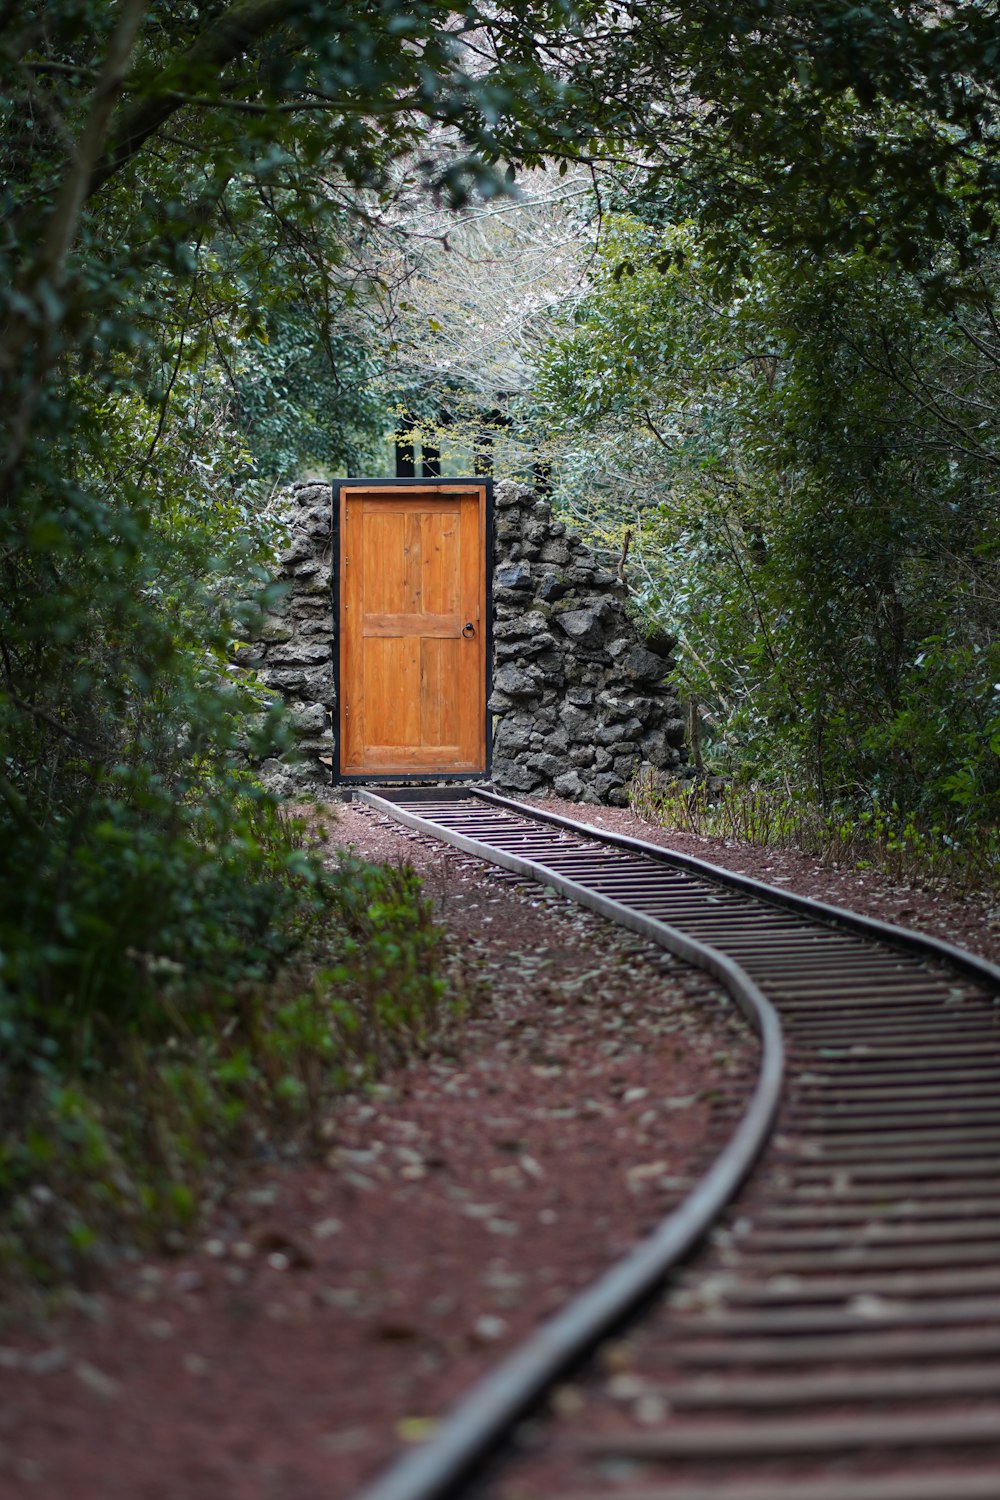 a wooden box on a train track